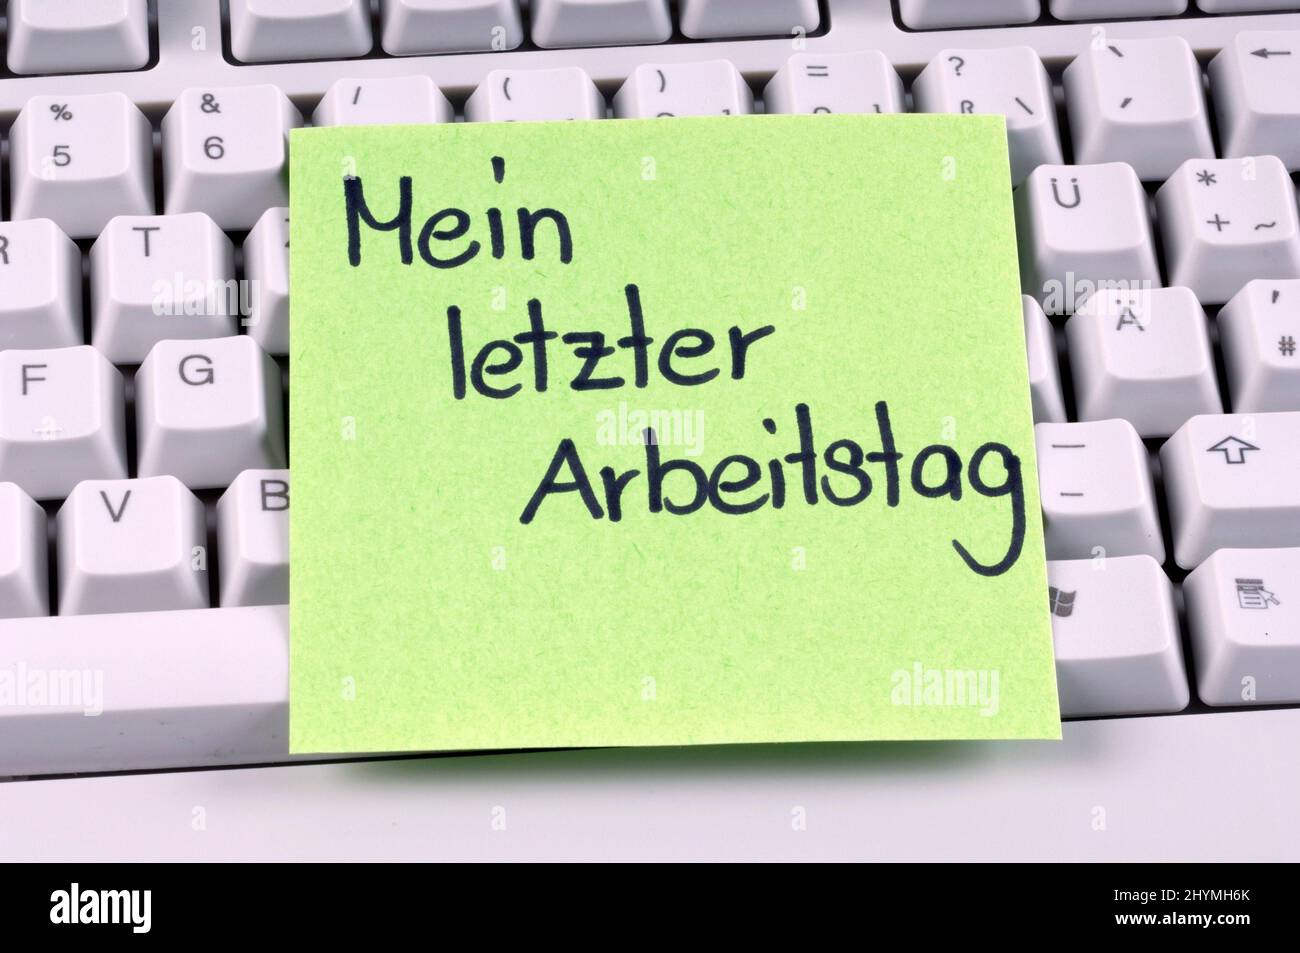 Keyboard with a message 'Mein letzter Arbeitstag', last working day Stock Photo